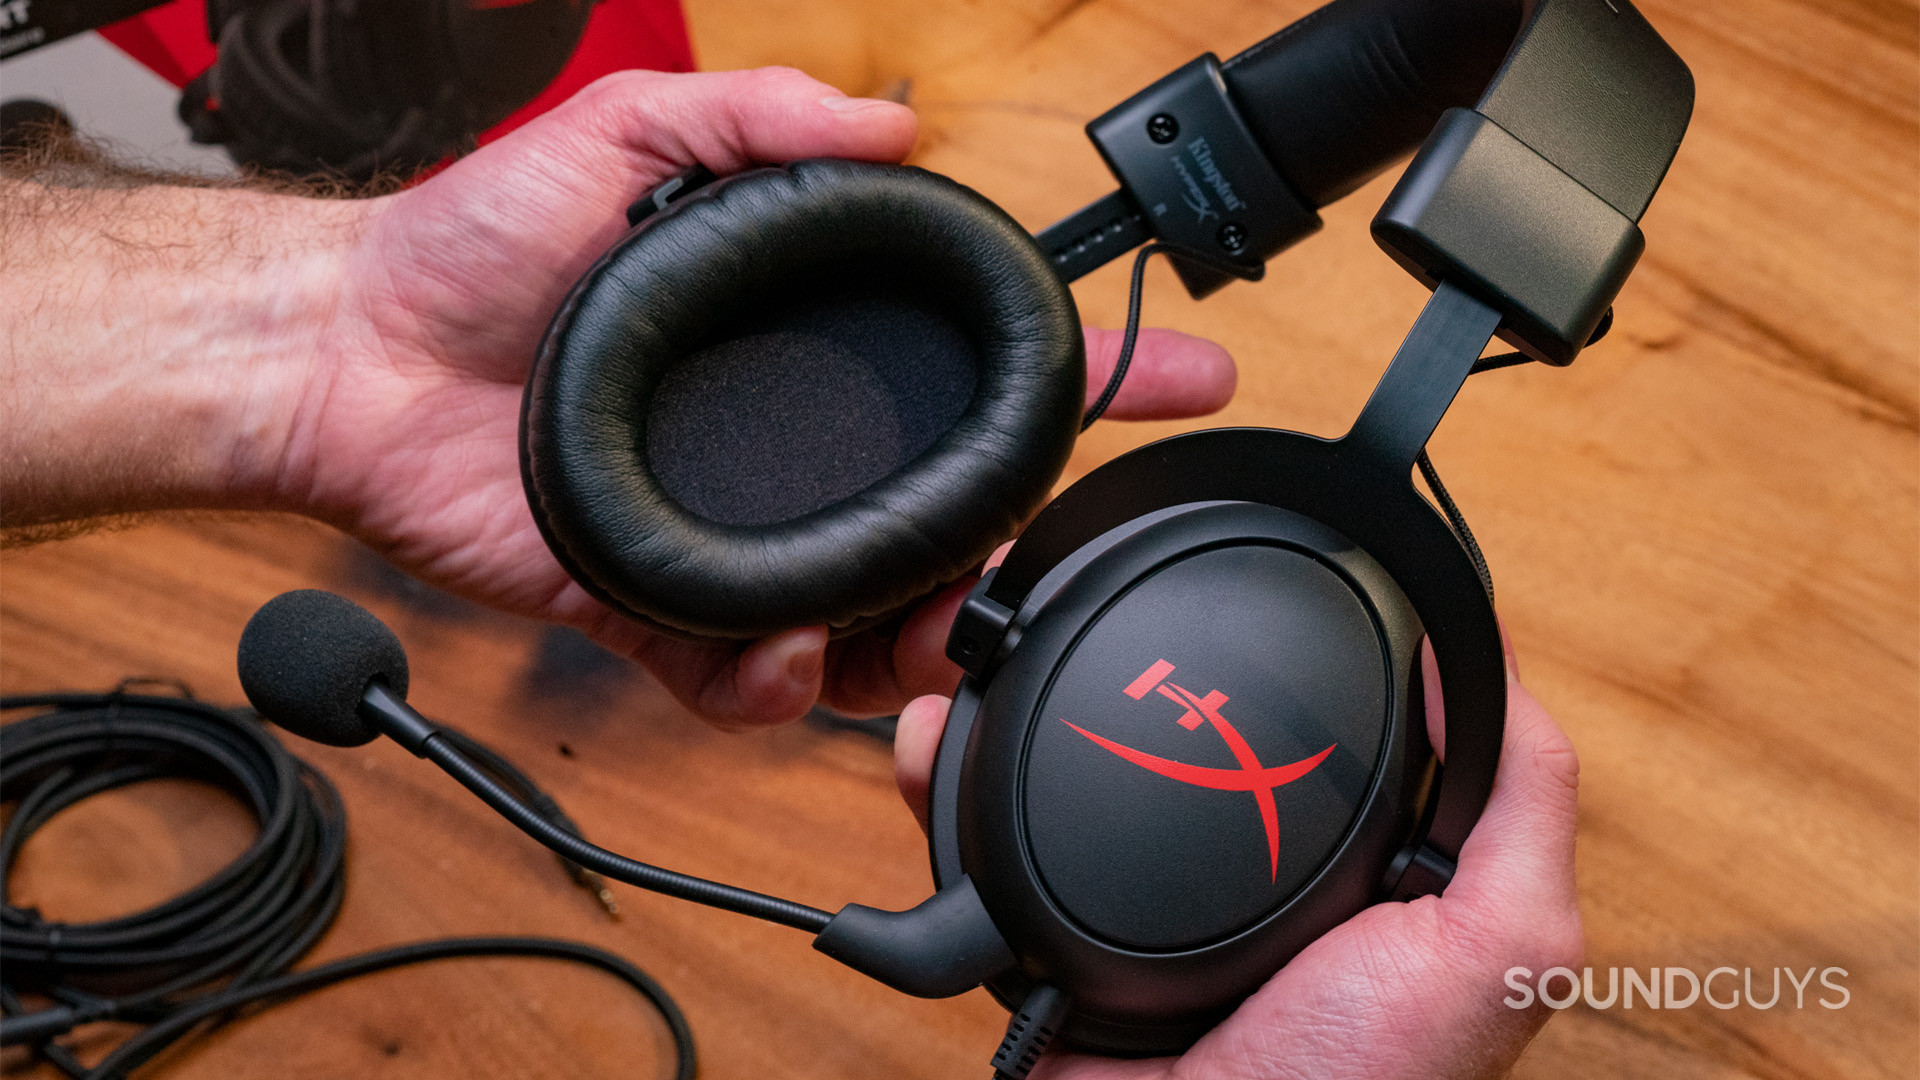 The HyperX Cloud Core being held in two hands and showing the ear cups